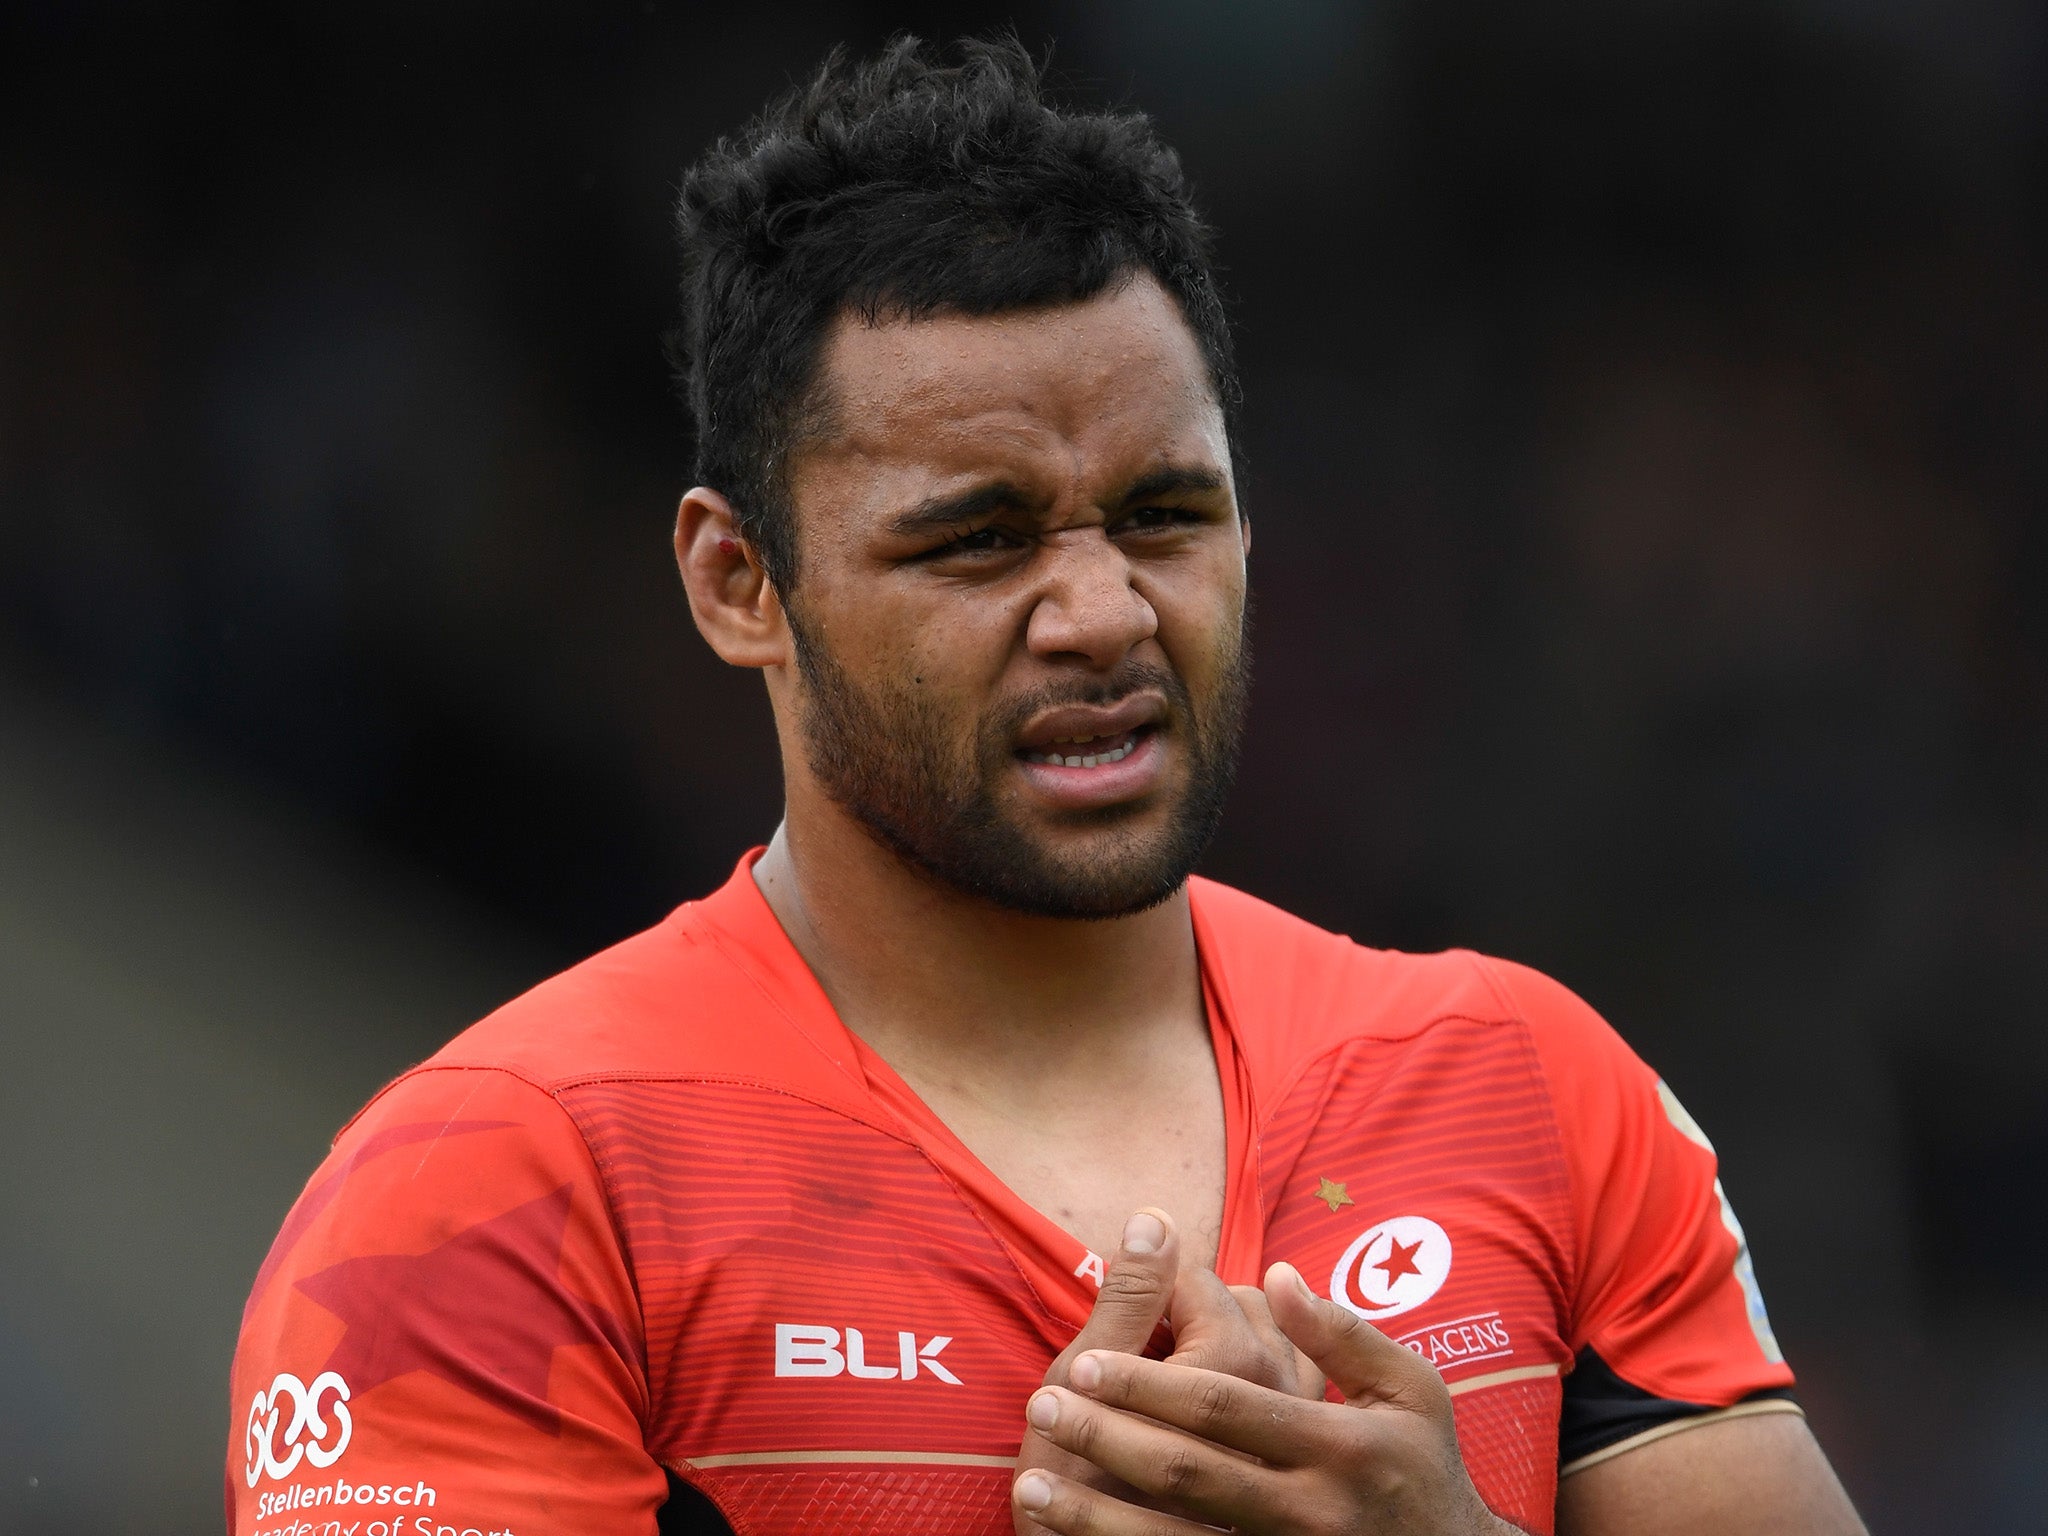 Vunipola was replaced on the tour after deciding to see to his shoulder injury